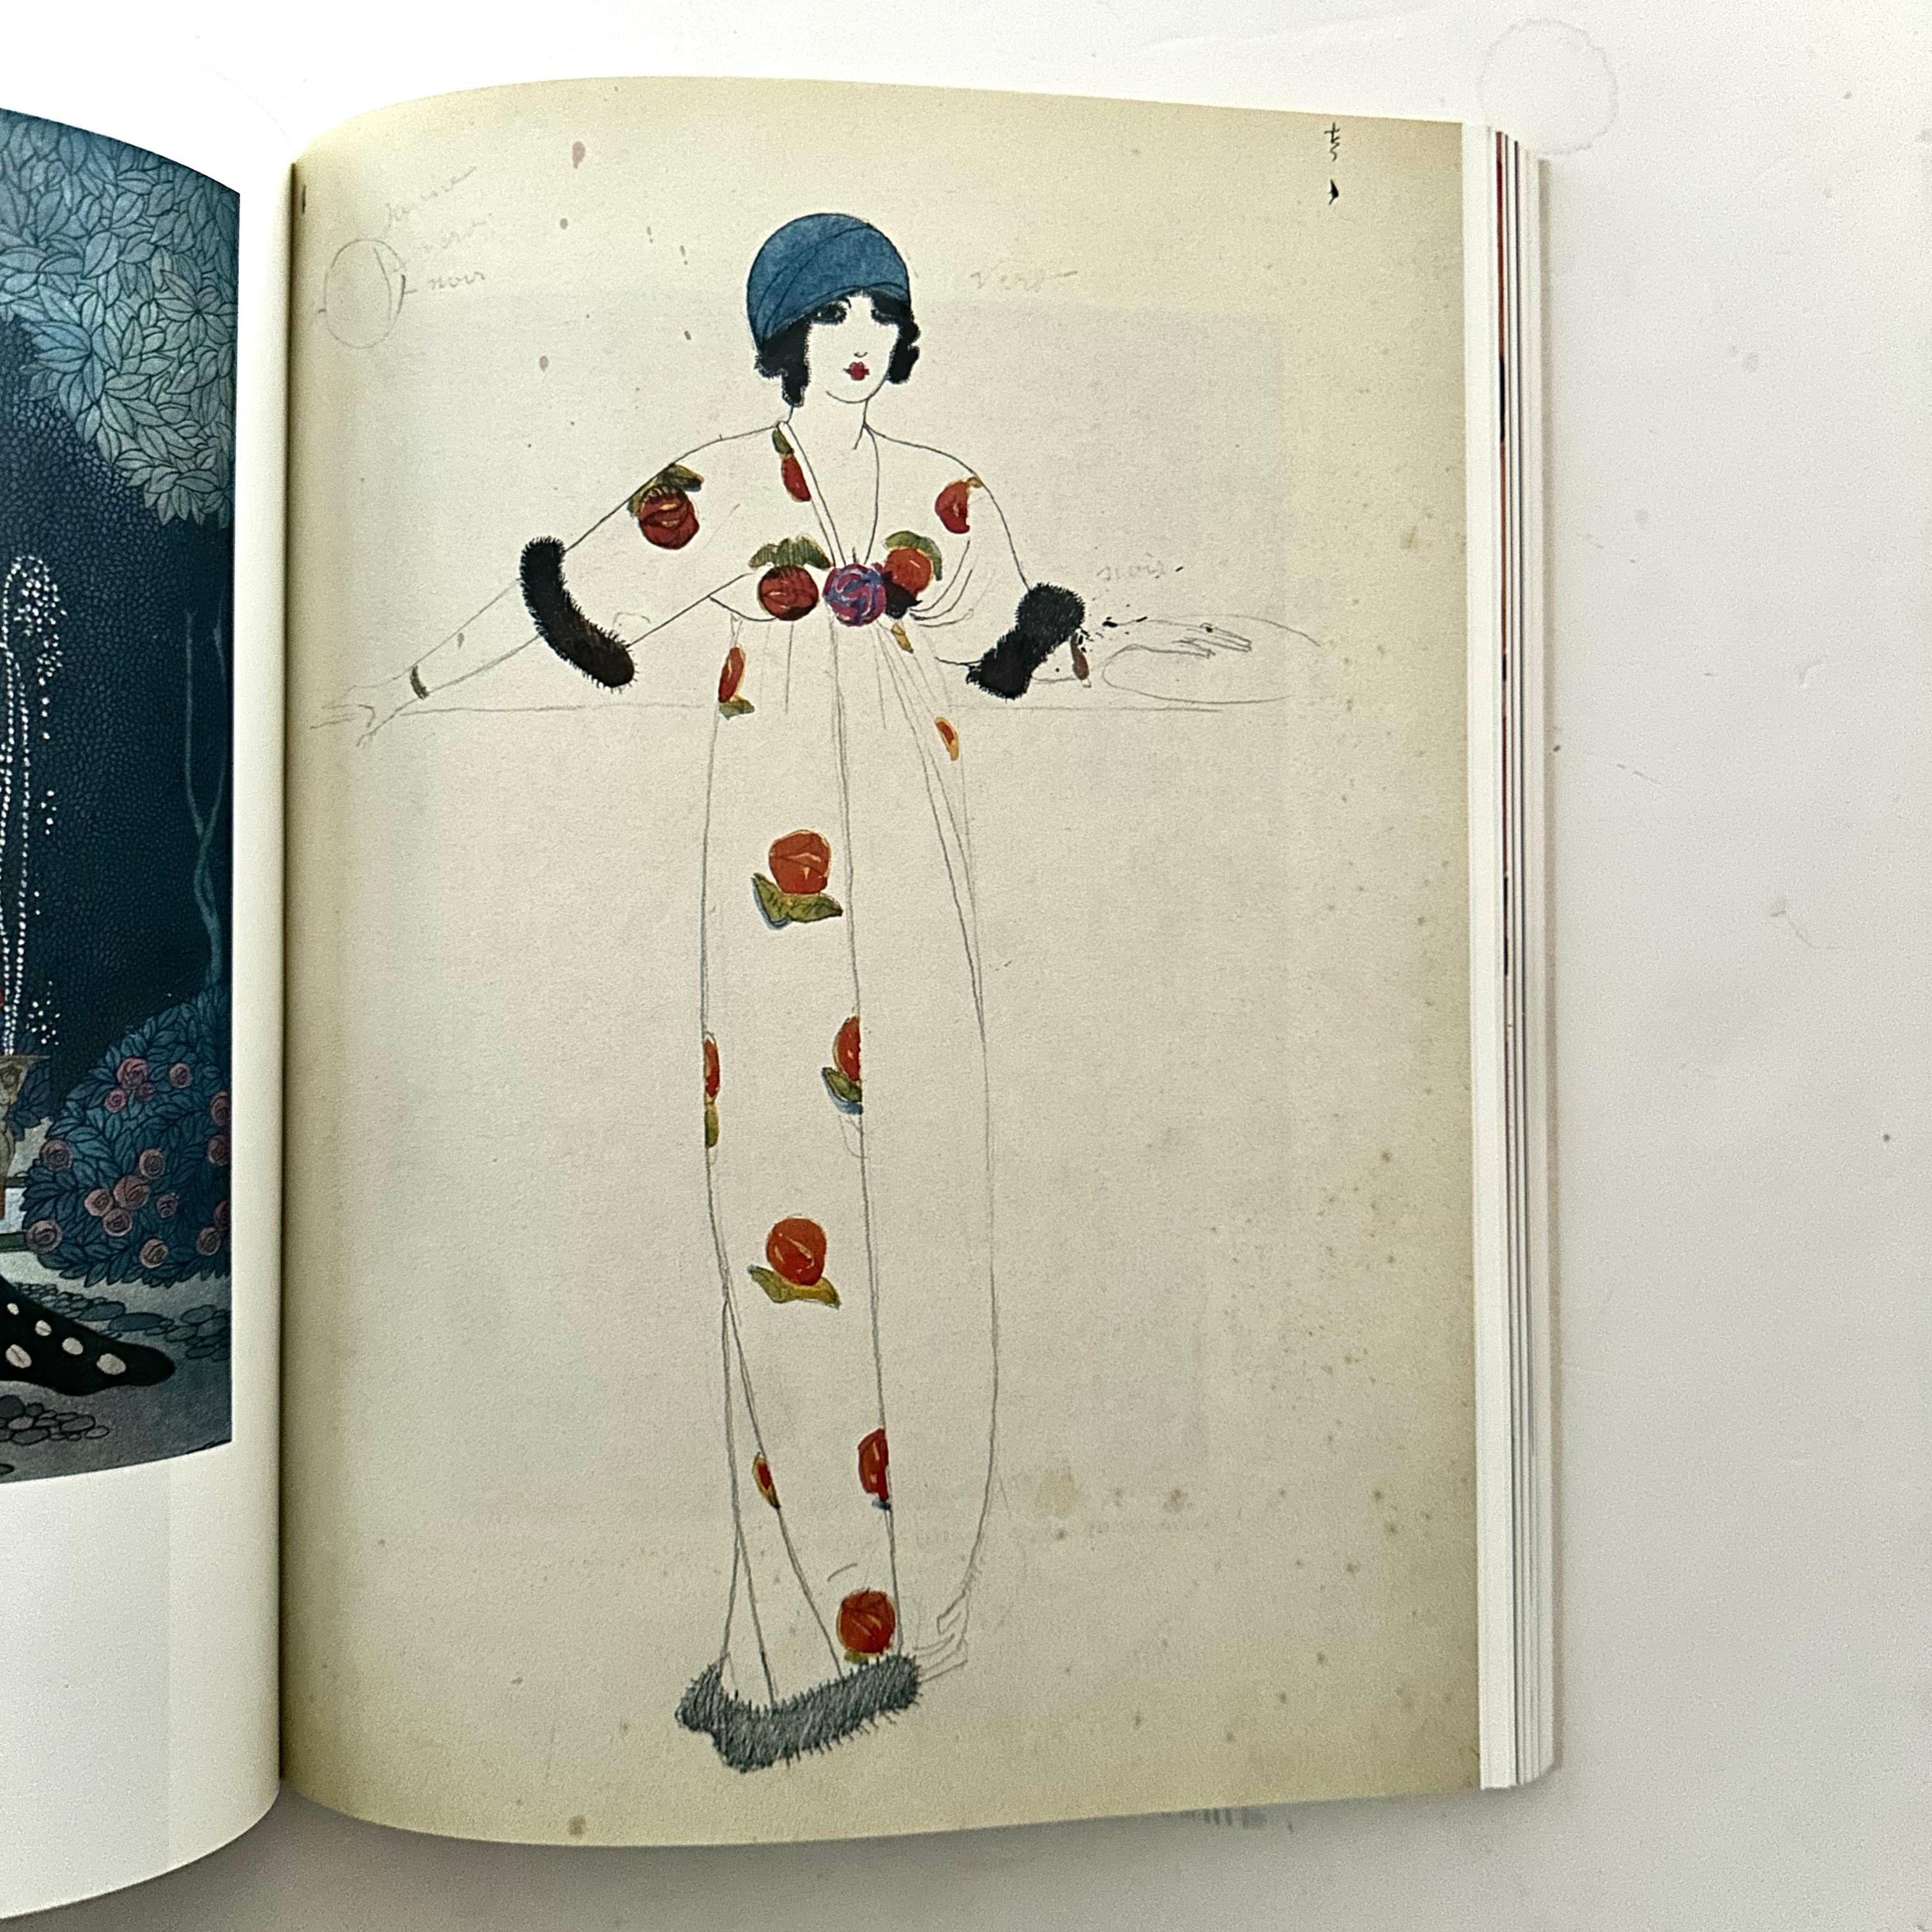 Published by Musée de la Mode et du Costume, Palais Galliera, 1st edition, Paris, 1986. Softcover with French text.

Paul Poiret and Nicole Groult bought a new modernity to couture. This book documents their creative vision following their work from